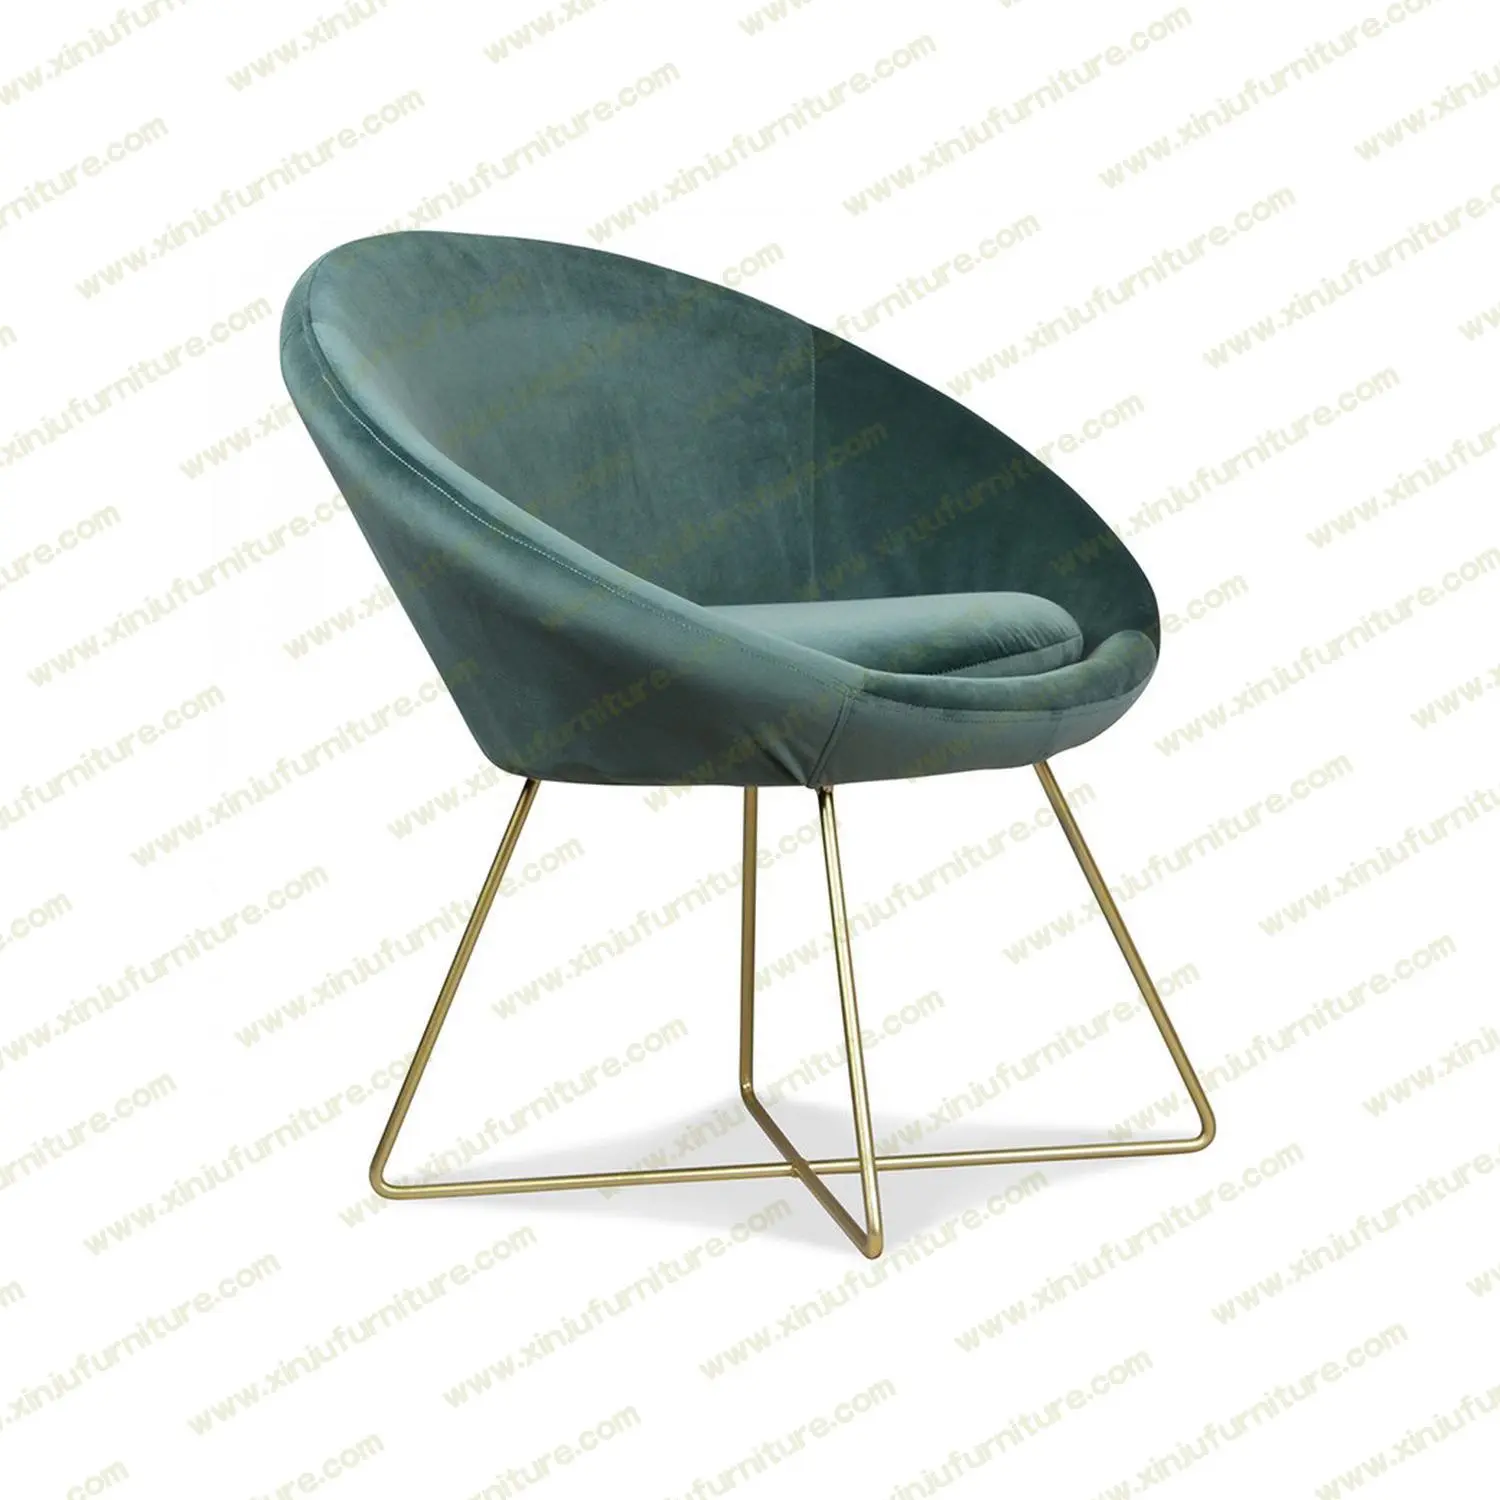 Round tufted comfortable household chair back